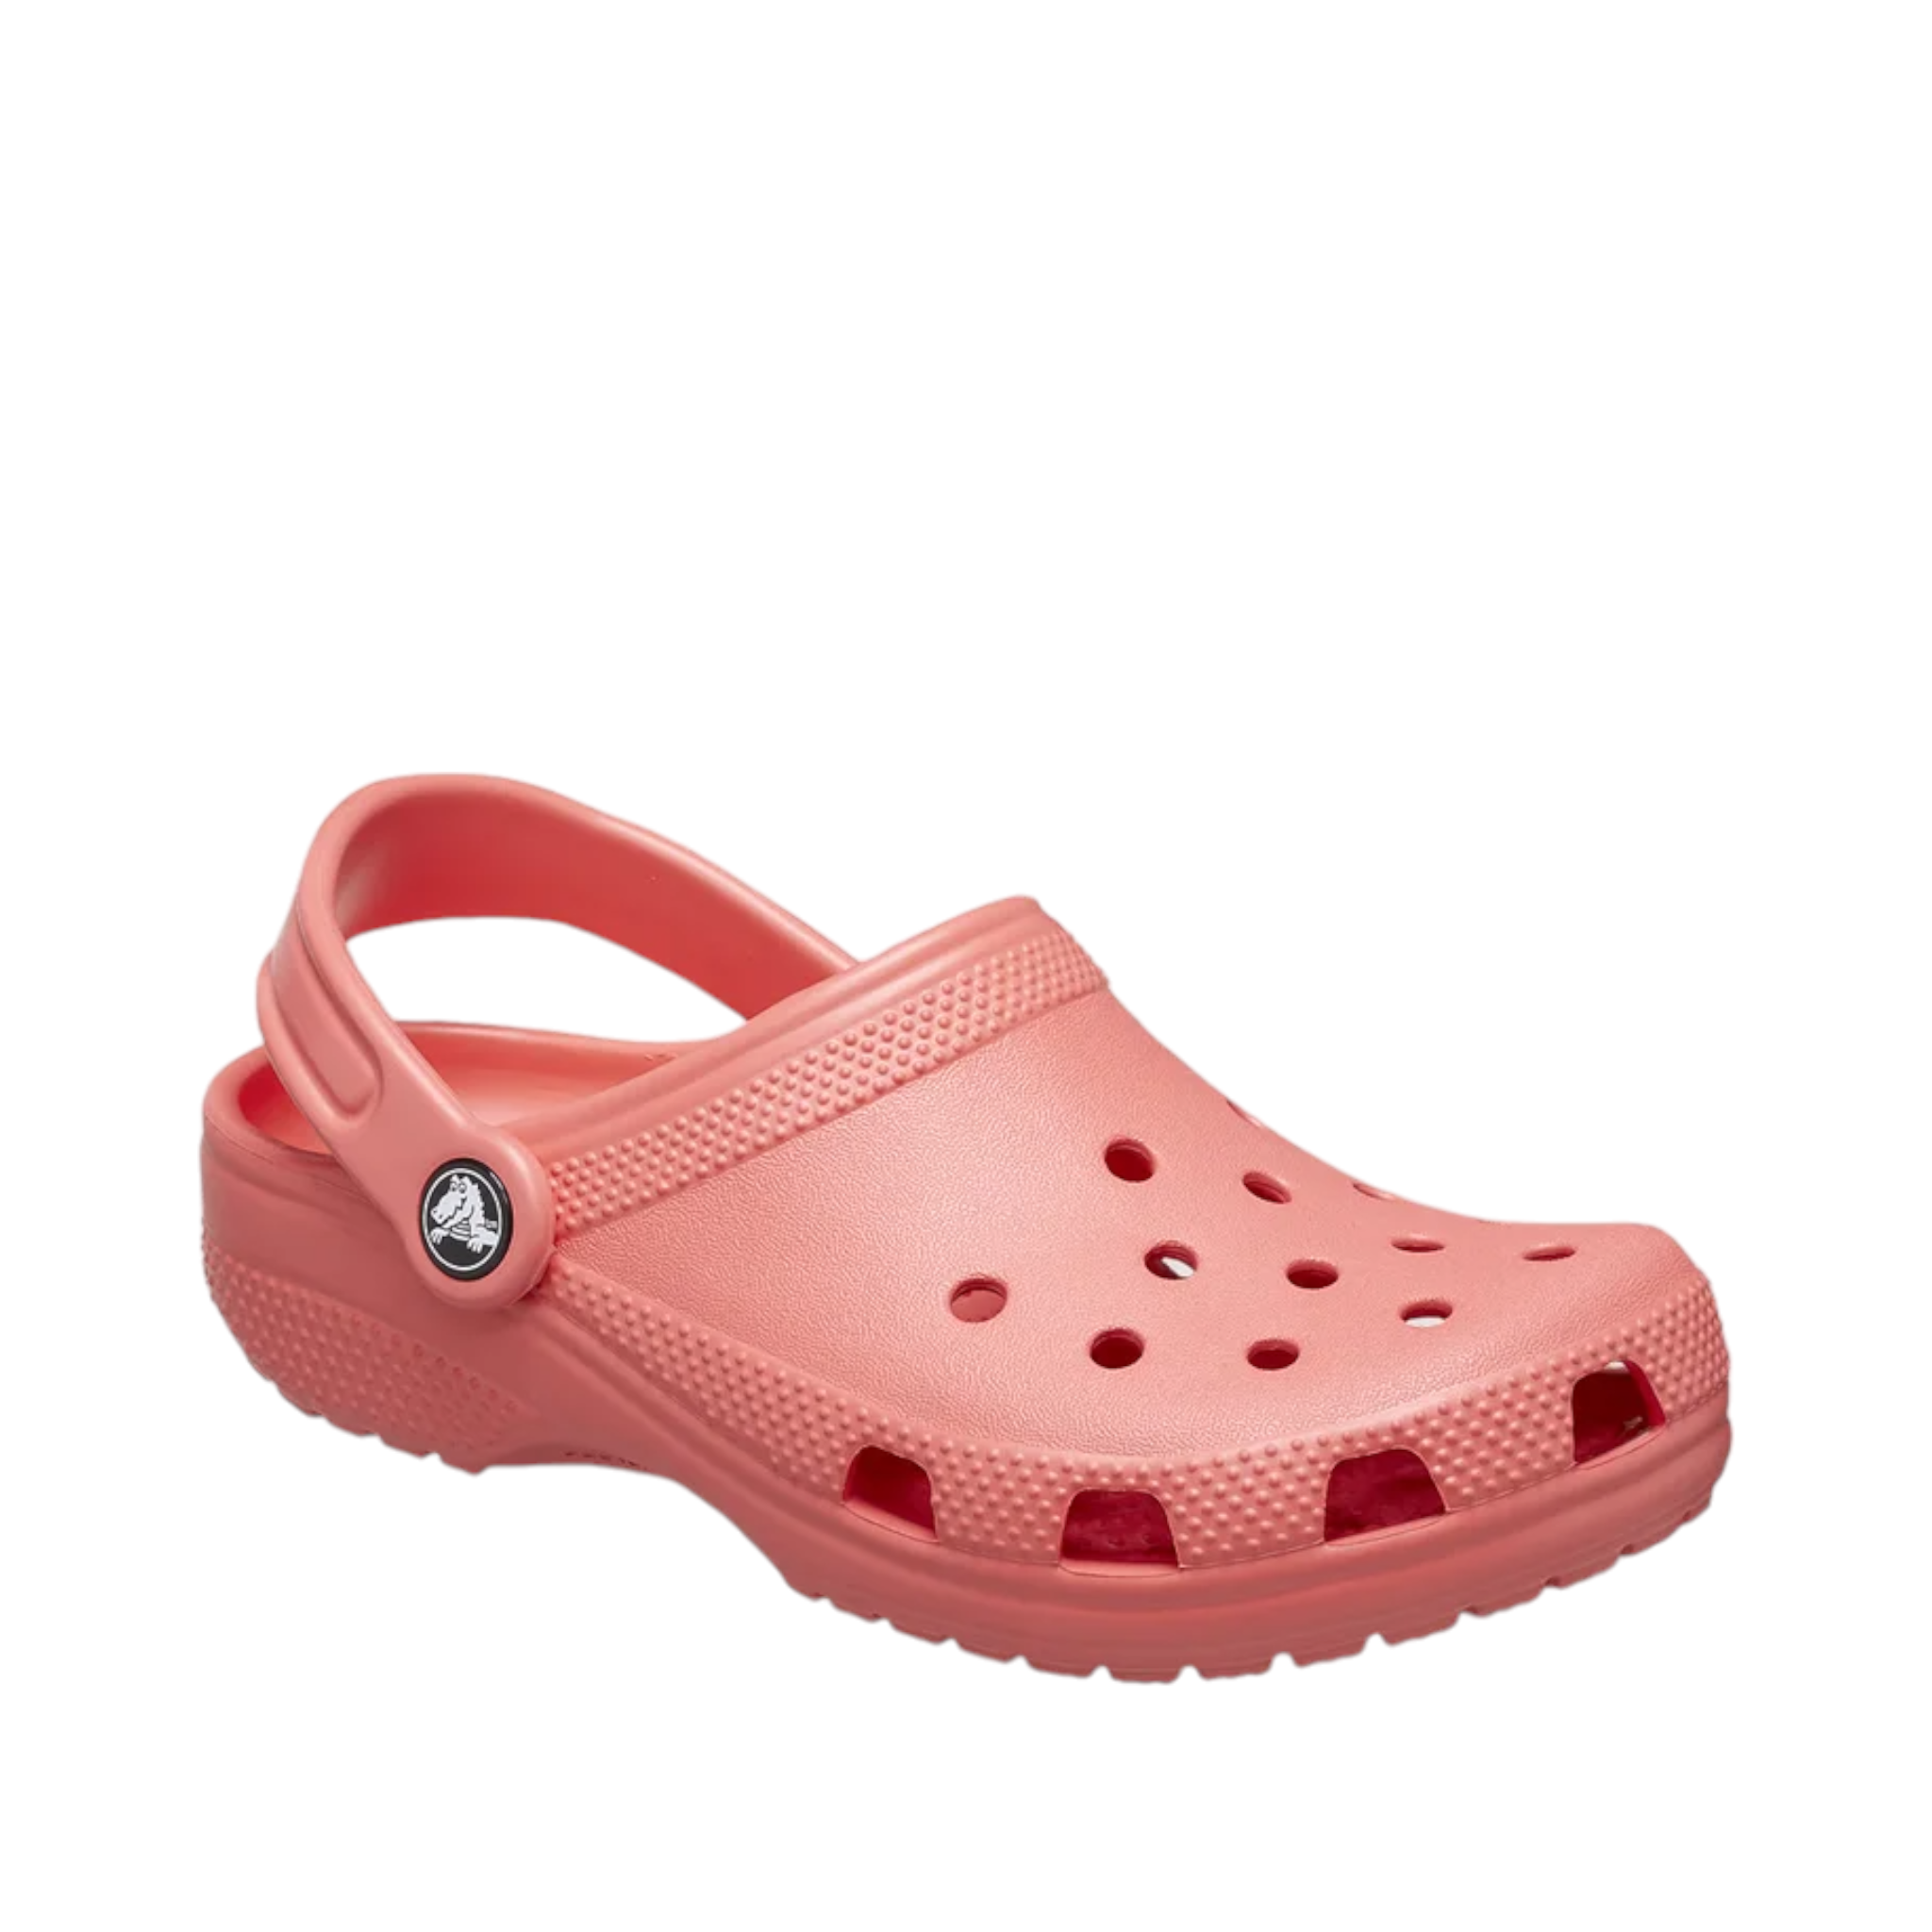 Crocs Classic Clogs online and instore with shoe&amp;me Mount Maunganui. Shop Watermelon Clogs